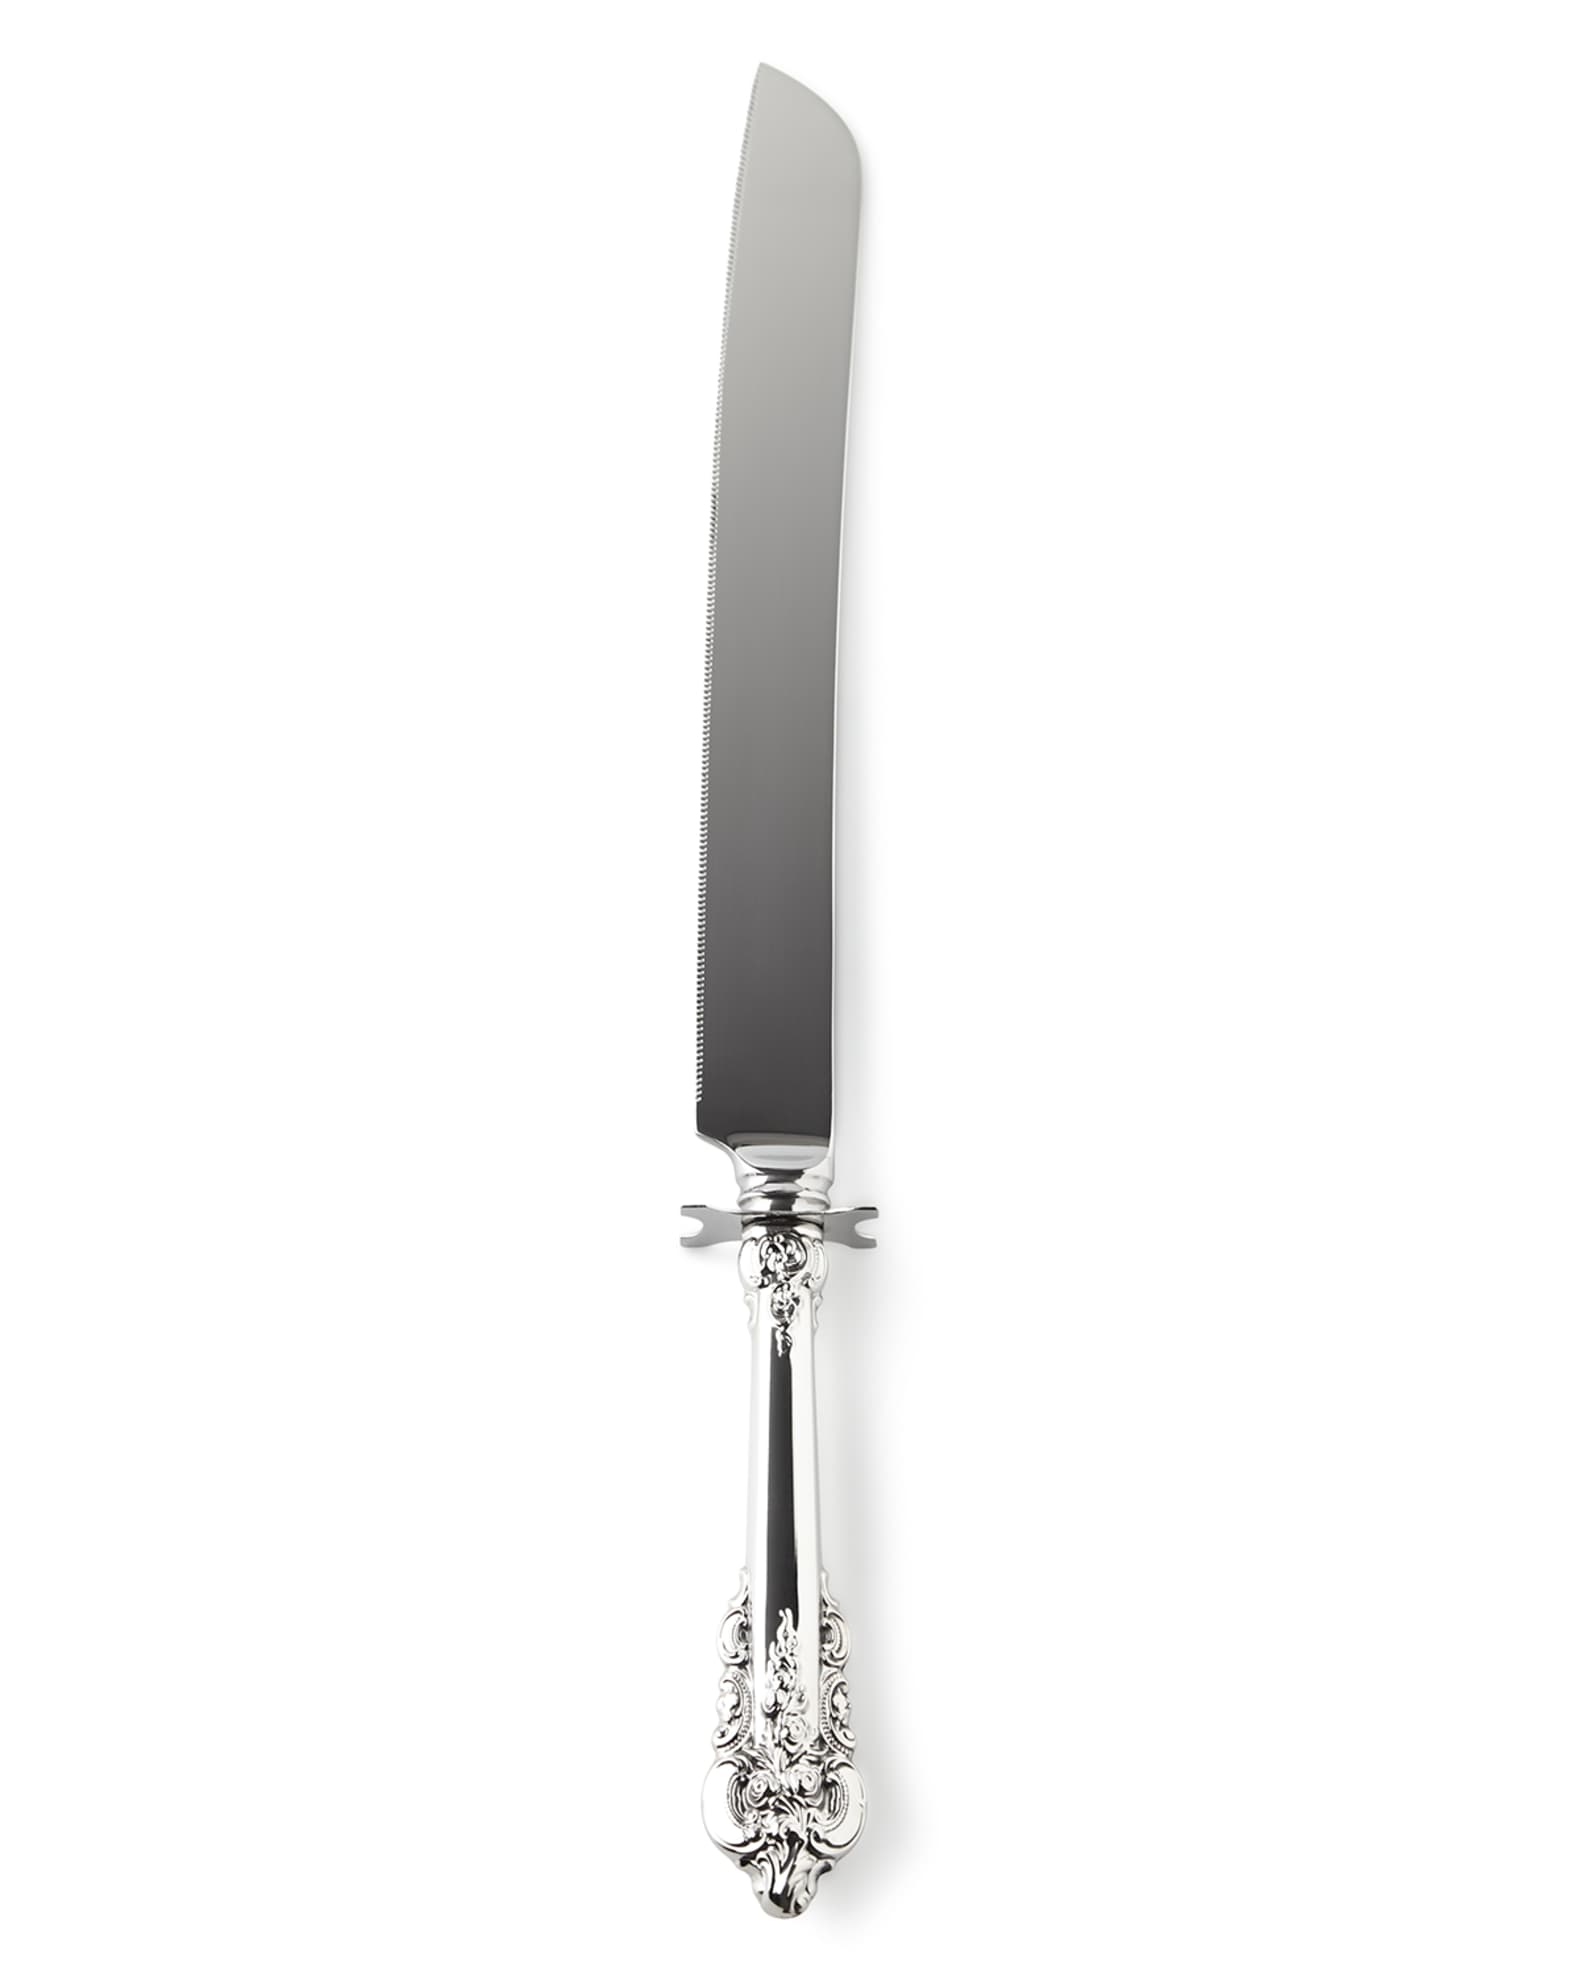 Wallace Silversmiths Grand Baroque Cake Knife